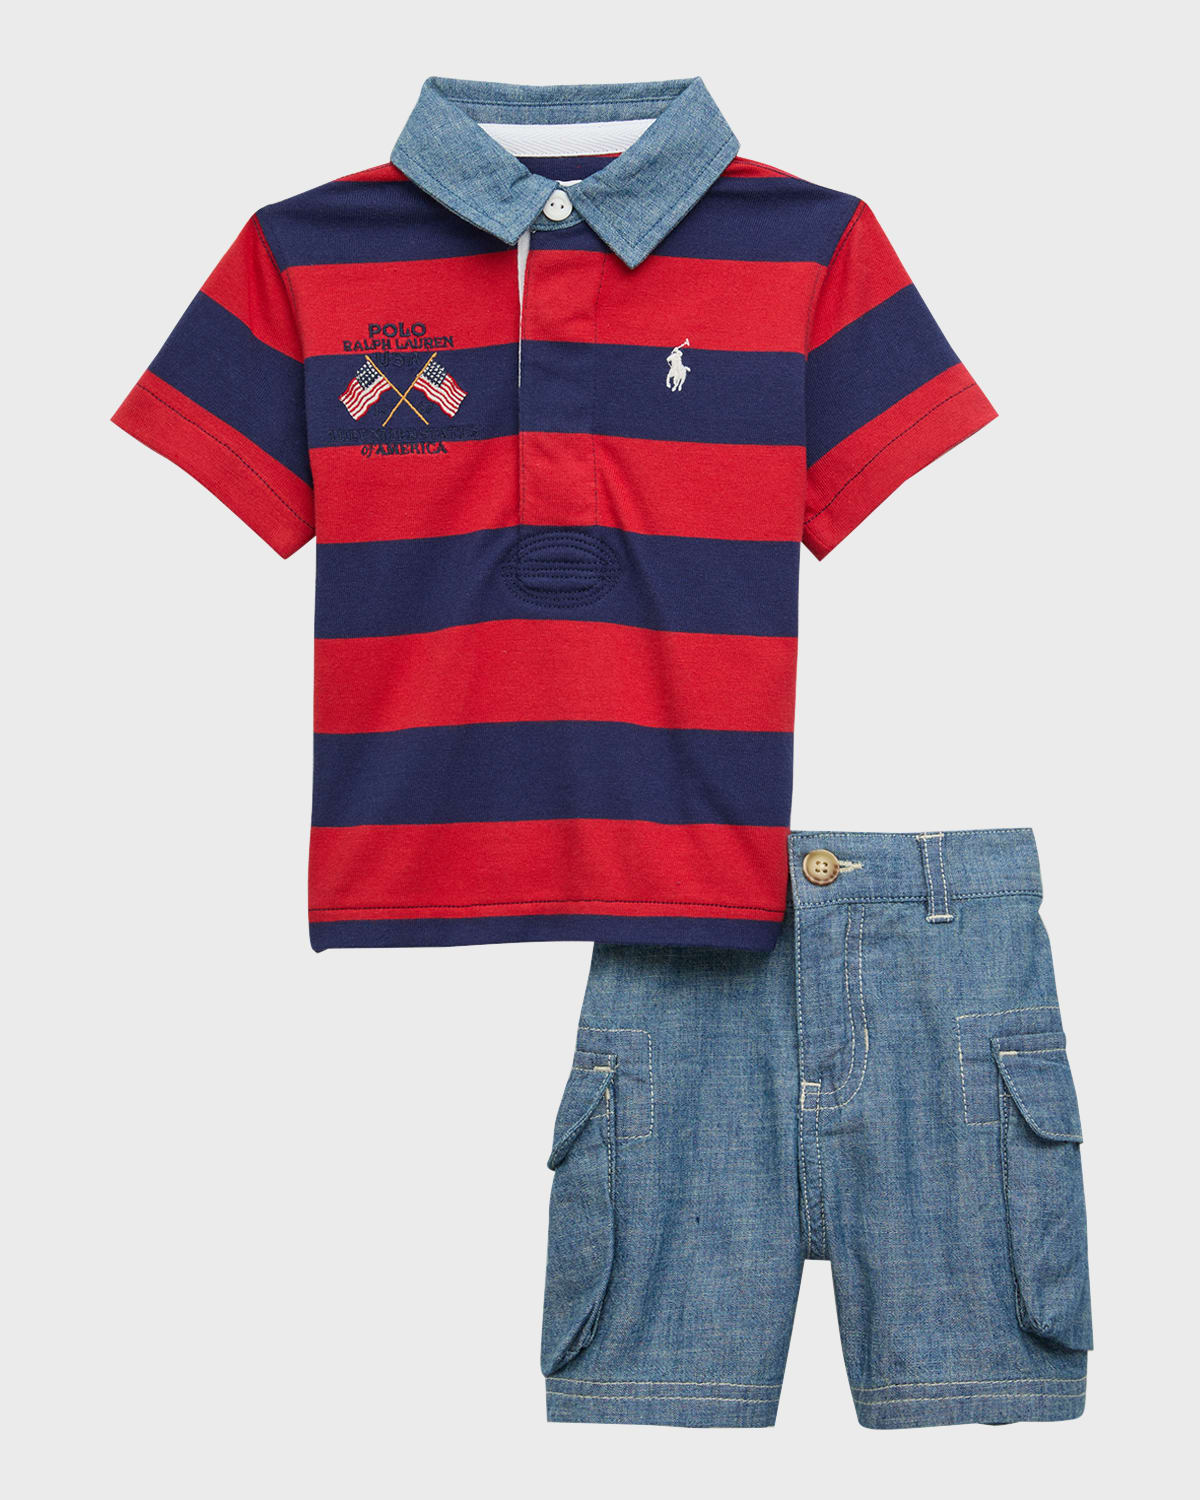 RALPH LAUREN BOY'S EMBROIDERED RUGBY SHIRT & CHAMBRAY SHORTS SET